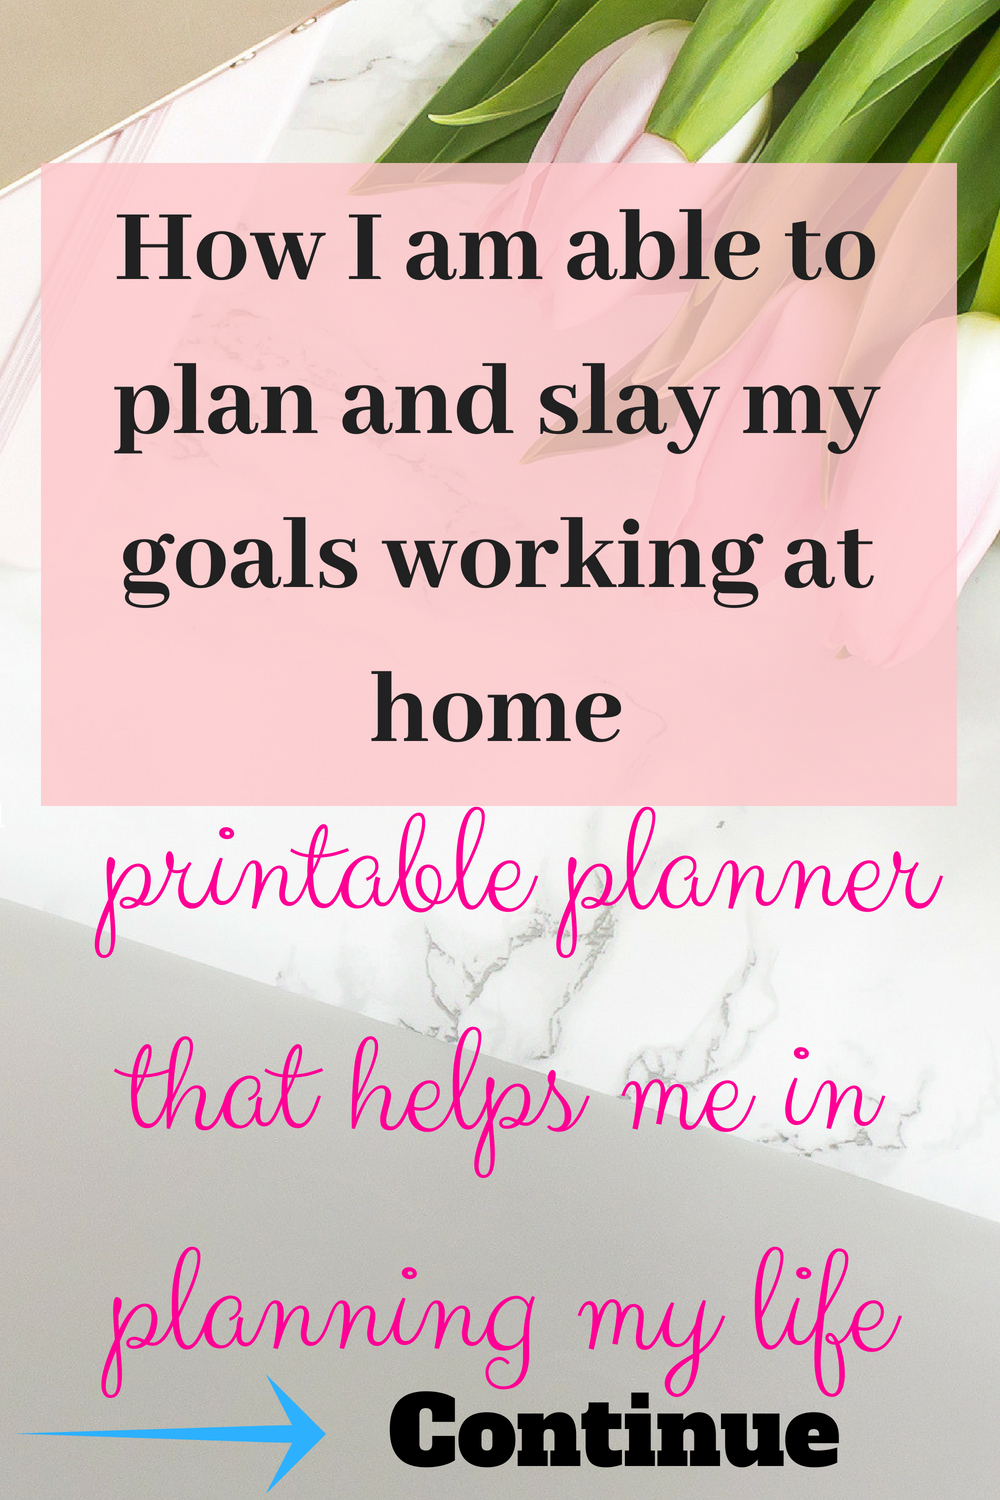 Set goals and actually achieve them! This is an affiliate product but I actually use it.Get your Printable Slay Your Goals Planner, with 60+ pages of printables, worksheets and planner pages, goal setting is easy. Plus, enjoy inspirational quotes and pages for every year, month, week and day. It's the ultimate planning bundle! #goals #planner #plannerlove #plannergirl #plannernerd #plannercommuntiy #planneraddict #prioritizing #printable #goaldigger #goalsetting #slayyourgoals #lifeplanning #goalsetter #goalplanner #2018goals #affiliatelink 